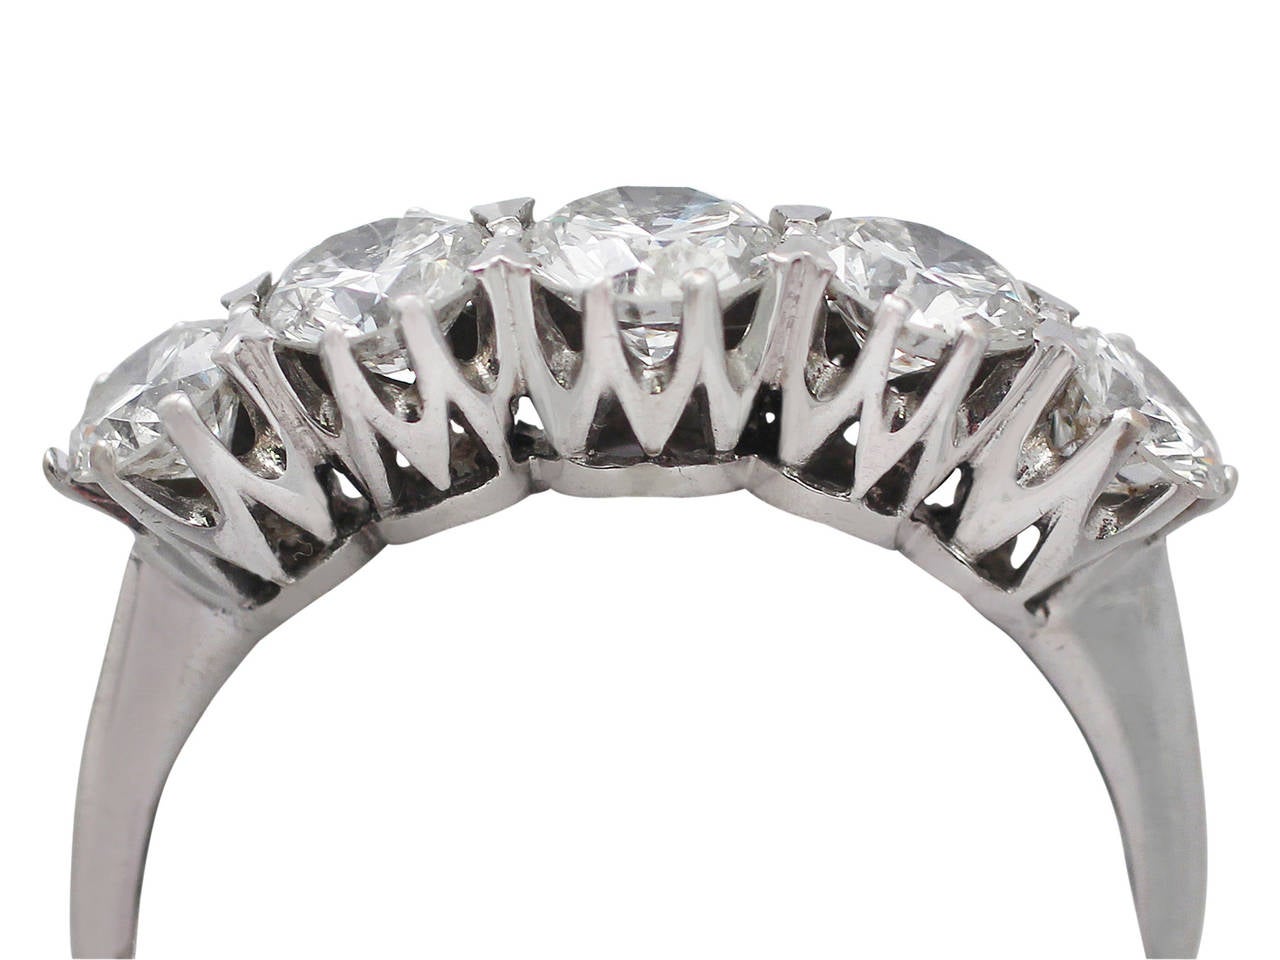 A fine and impressive English 1.72 carat diamond and 18 karat white gold five stone ring; part of the contemporary jewelry collection at 

This fine contemporary diamond ring has been crafted in 18k white gold.

The elevated pierced decorated